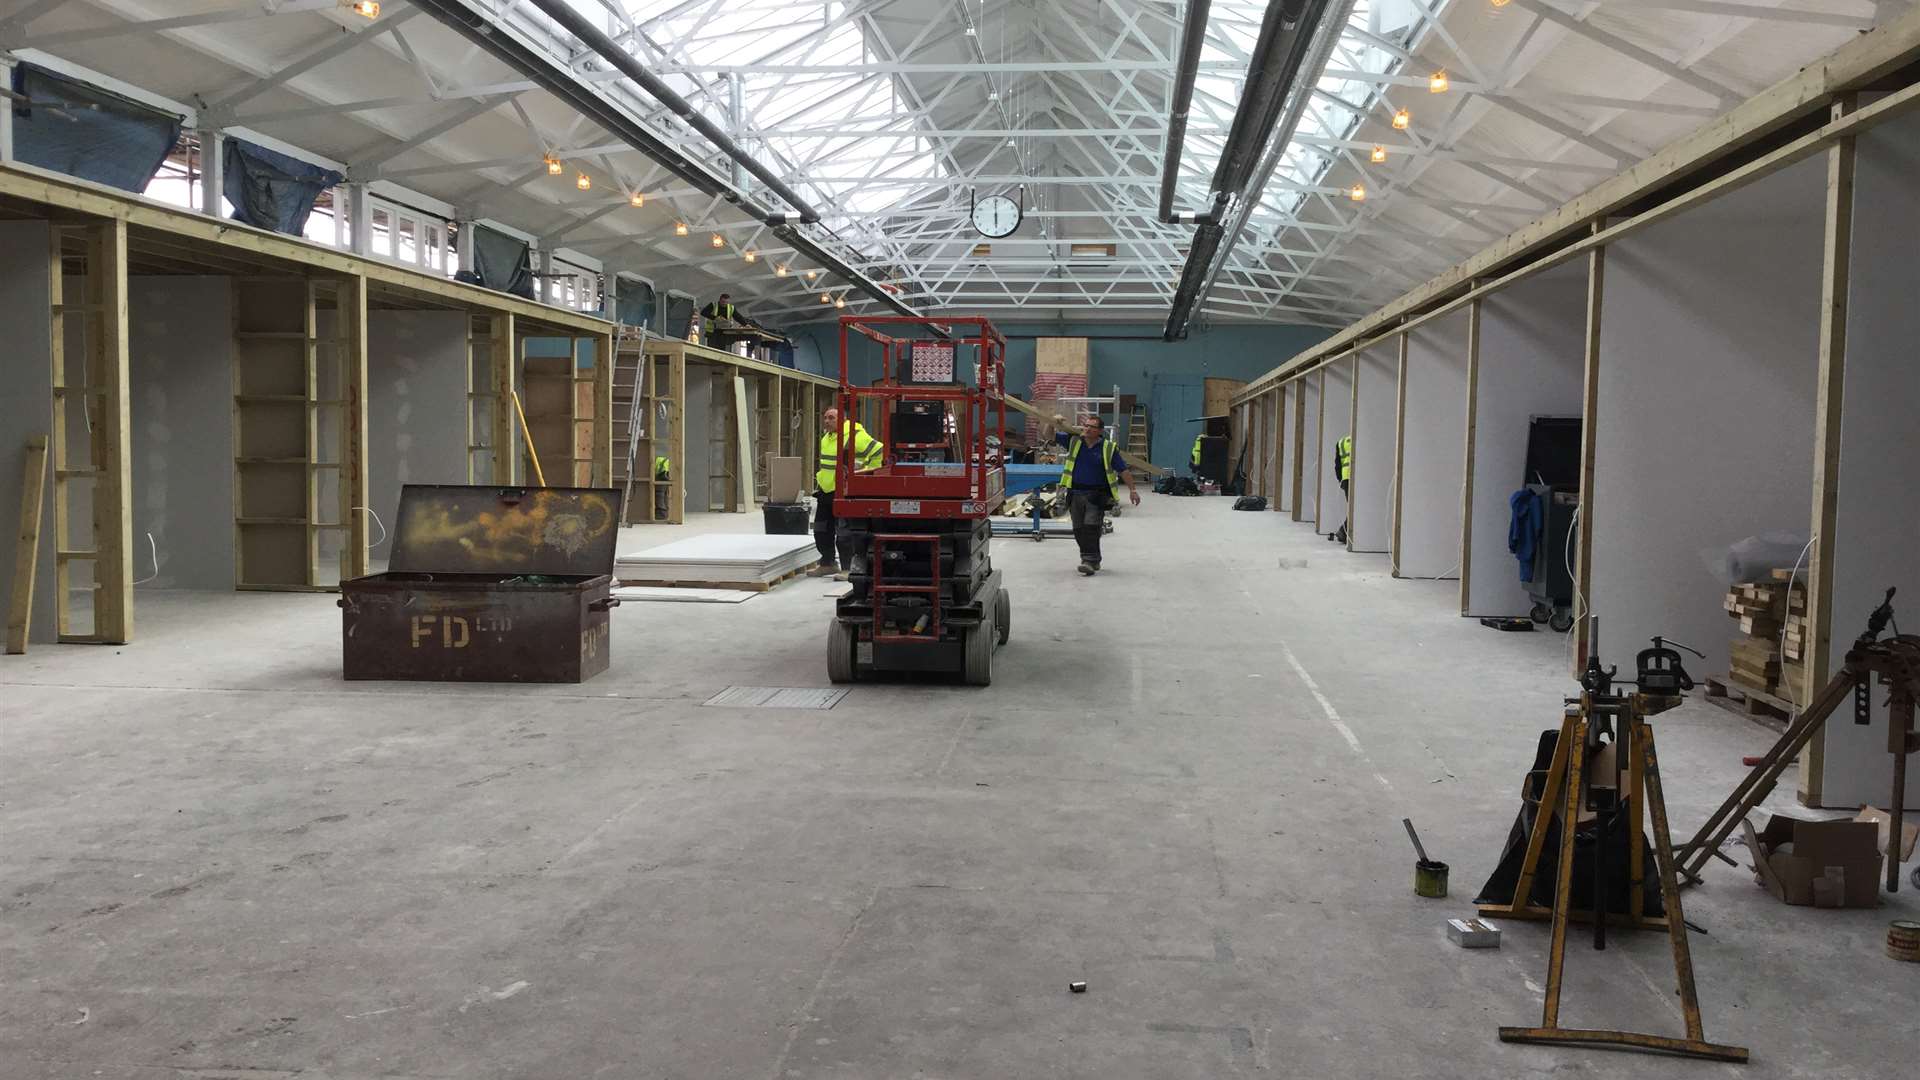 Work on the refurbished market hall is nearly complete